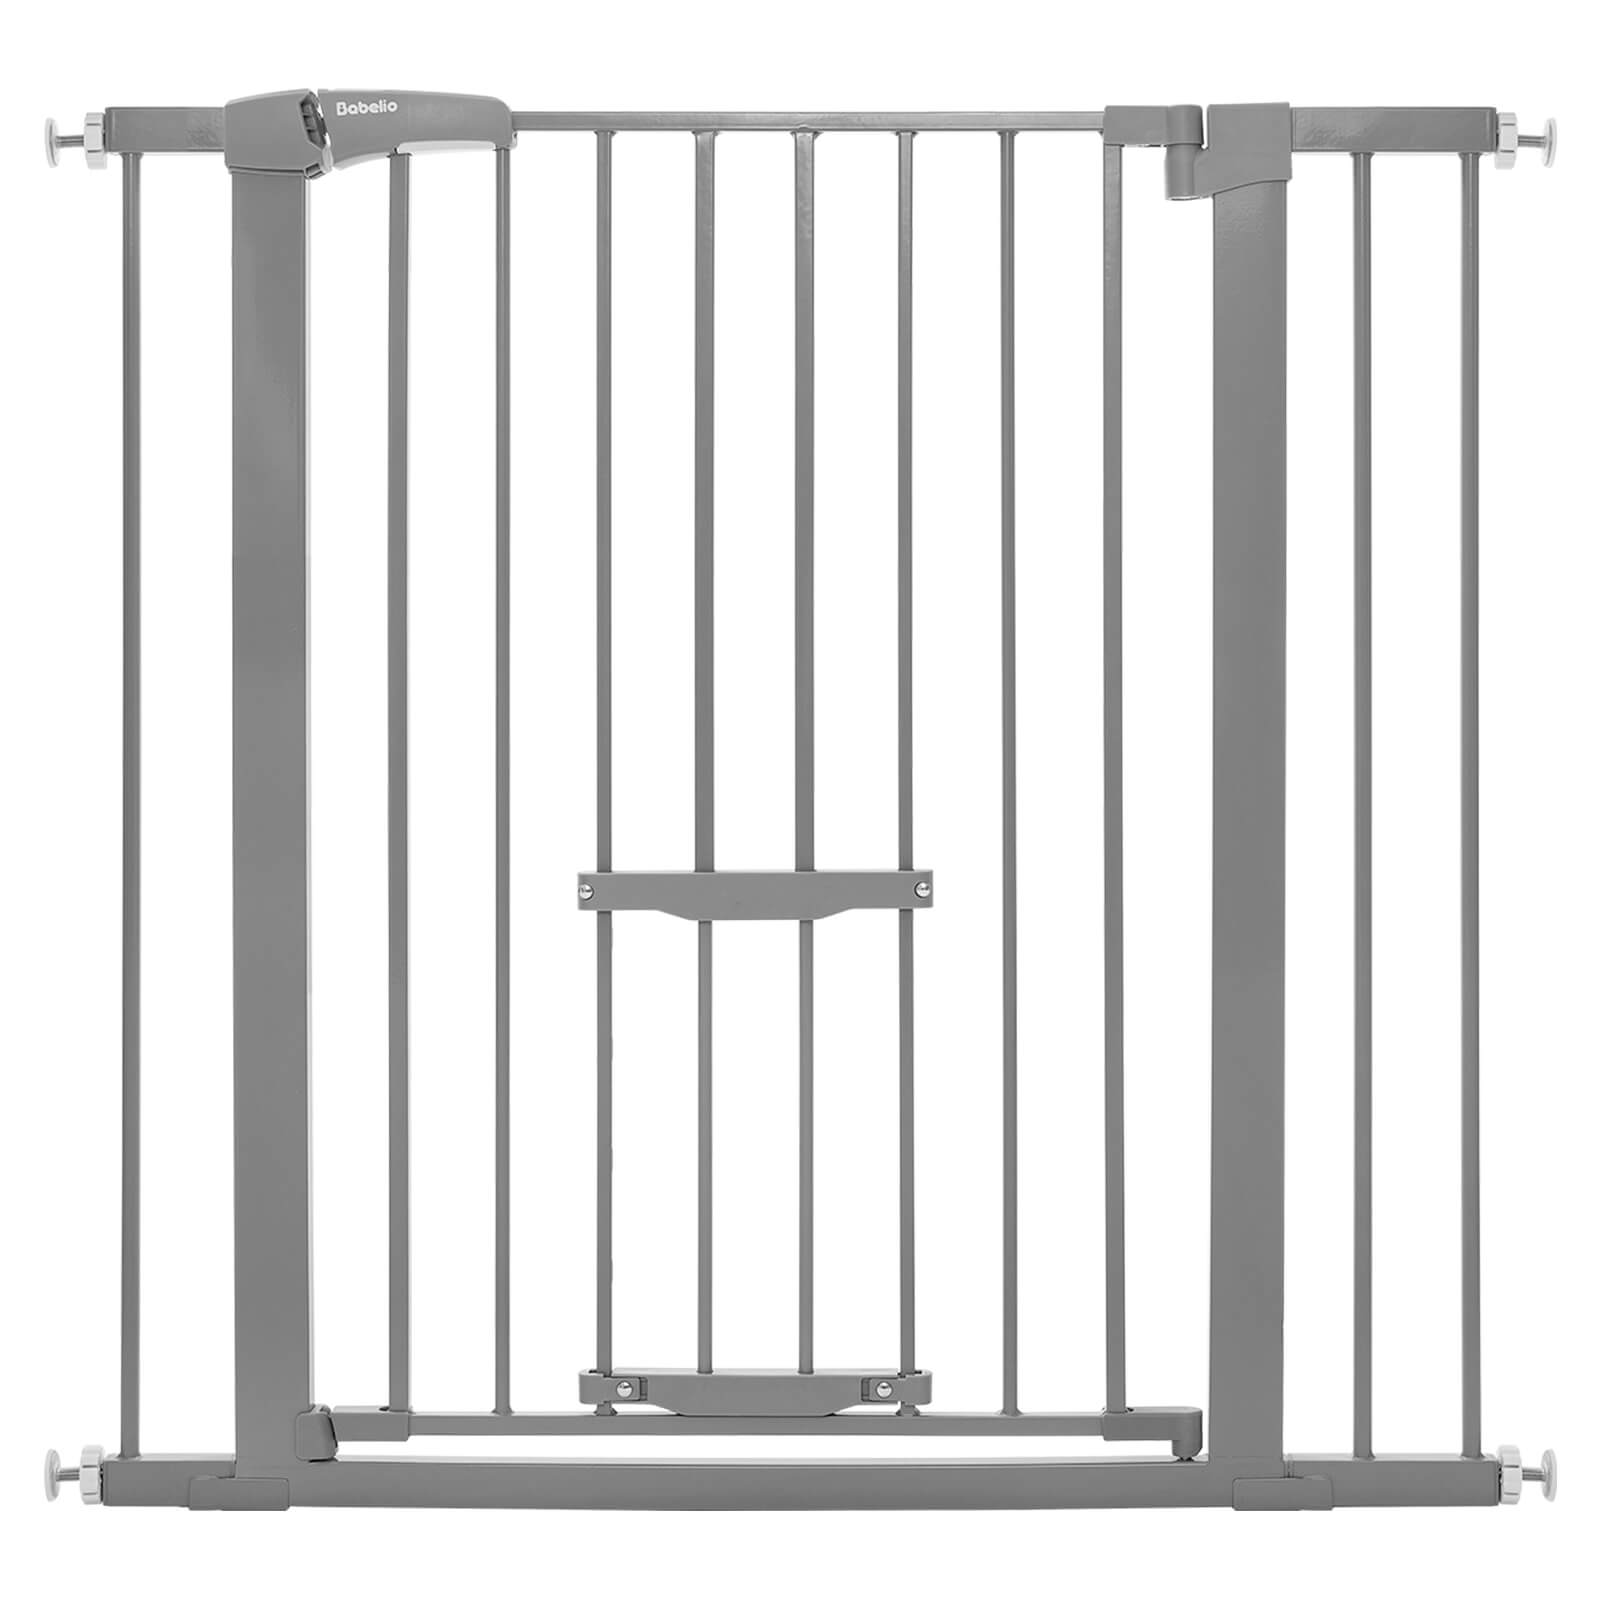 BABELIO 30" Tall Baby Gate with Adjustable Cat Door – 29-40" Wide, Metal Safety Gate for Stairs & Doorways, Auto-Close Feature, Tool-Free Install